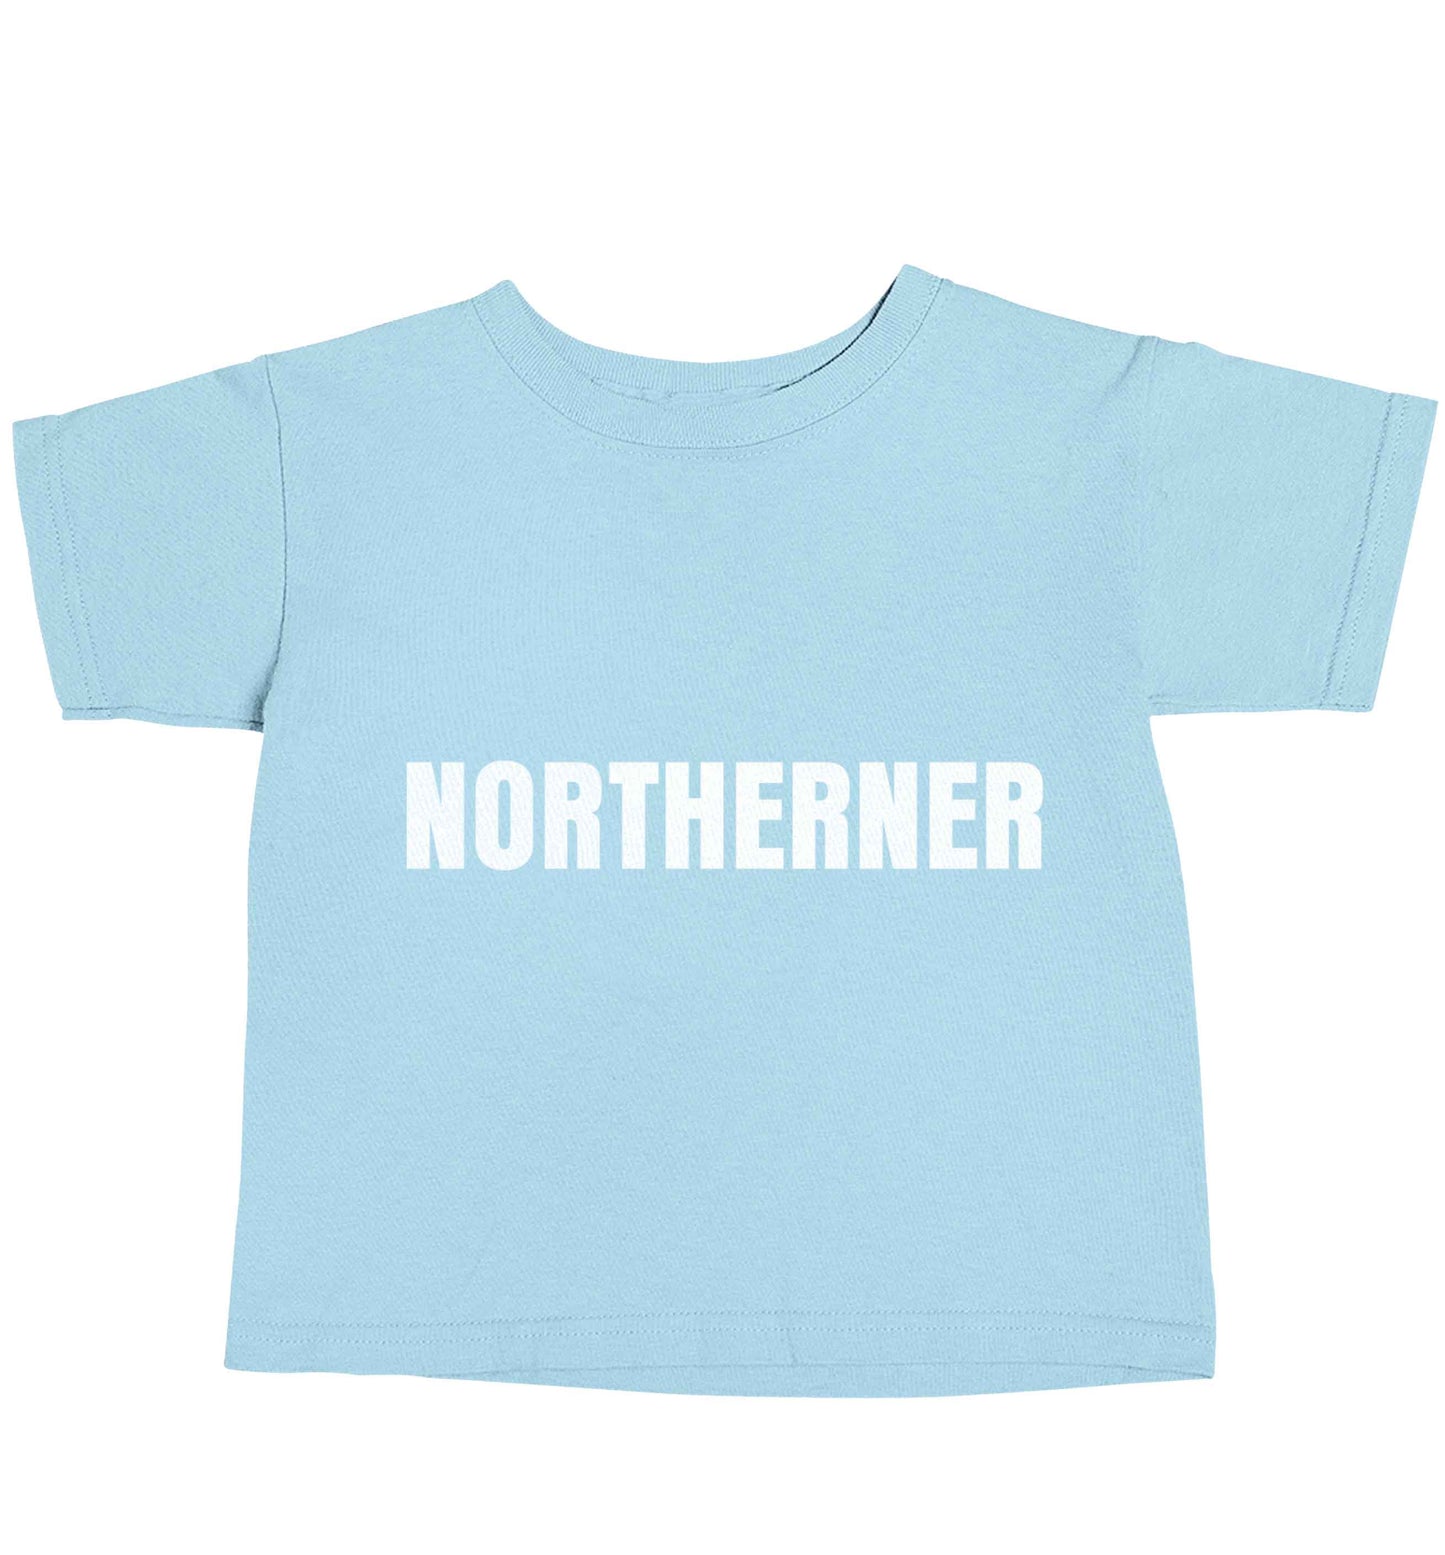 Northerner light blue baby toddler Tshirt 2 Years